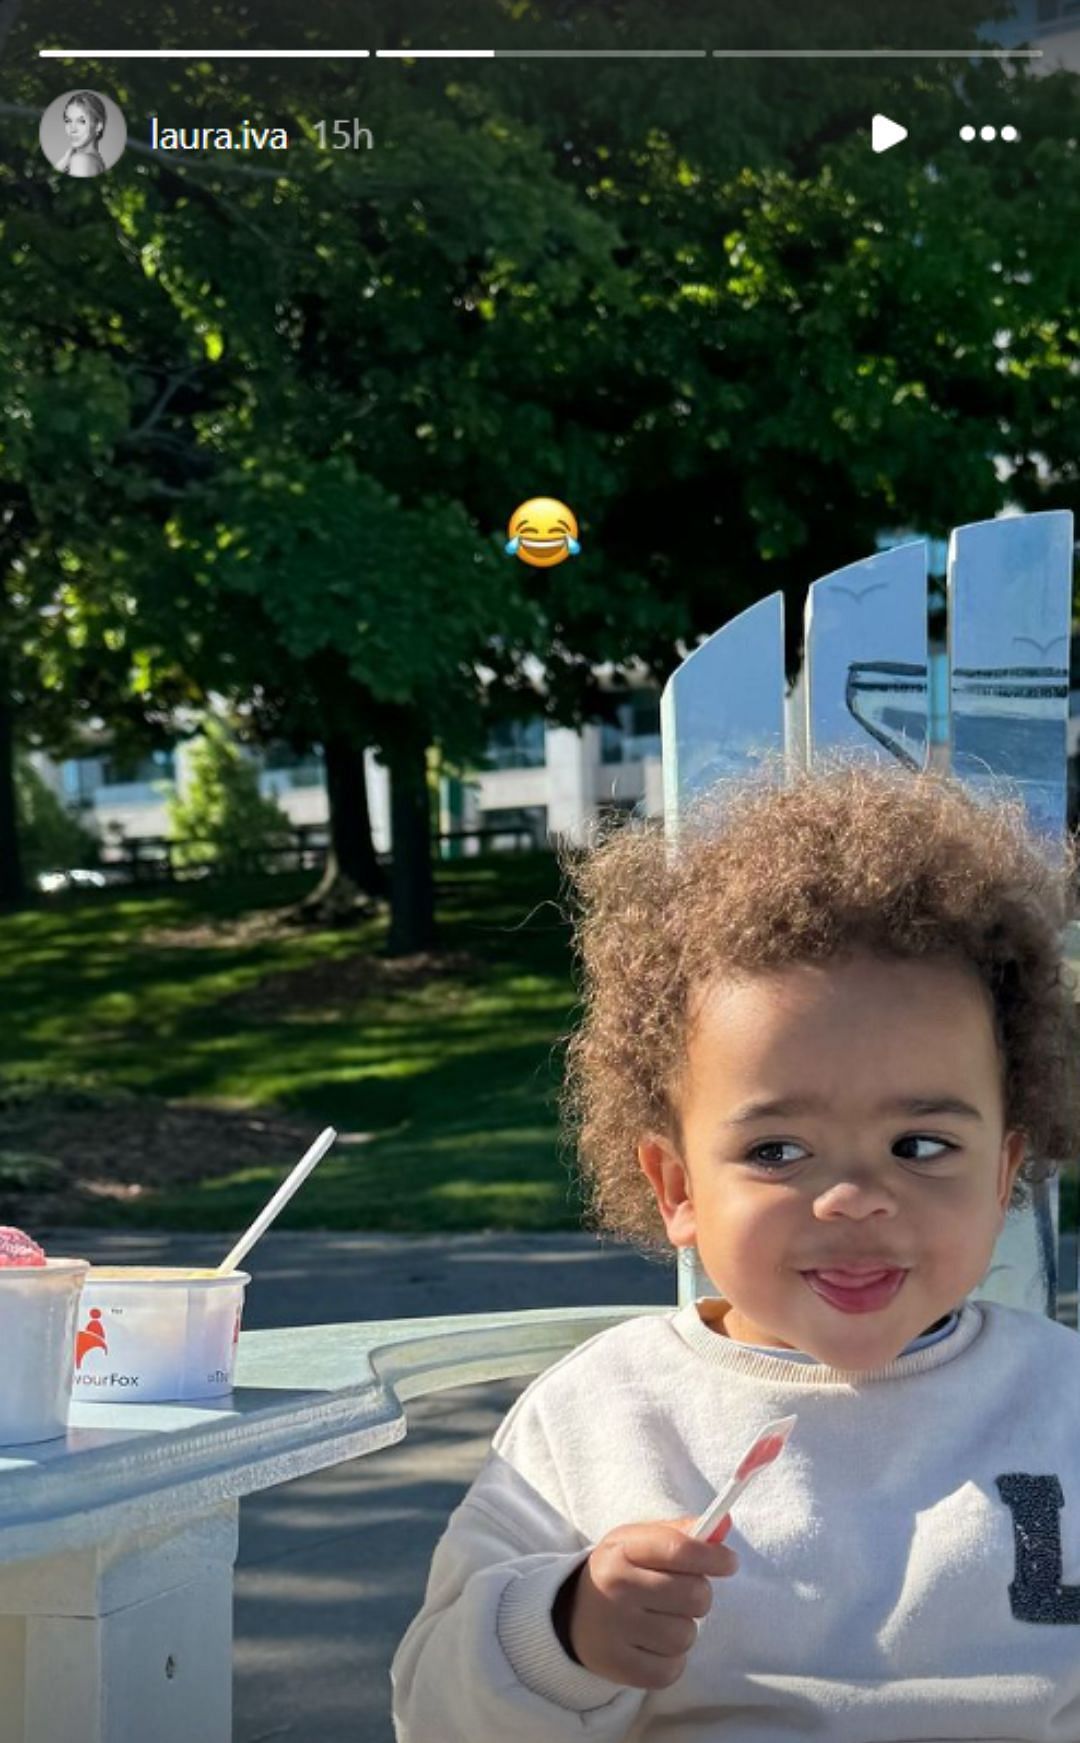 Laura and son Riley on a mother-son gelato date. Credits: laura.iva/Instagram